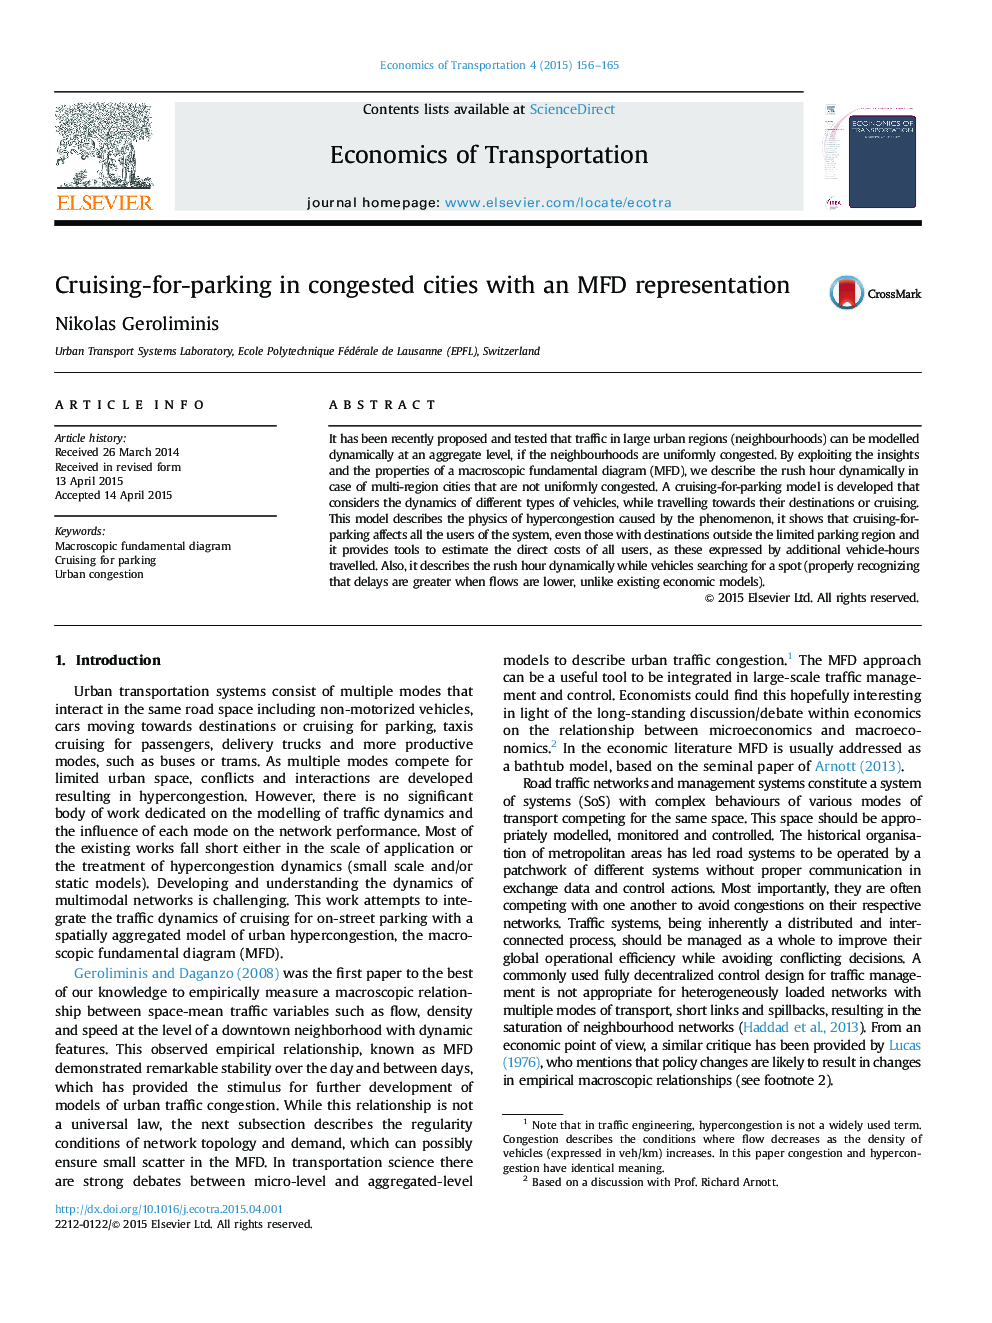 Cruising-for-parking in congested cities with an MFD representation